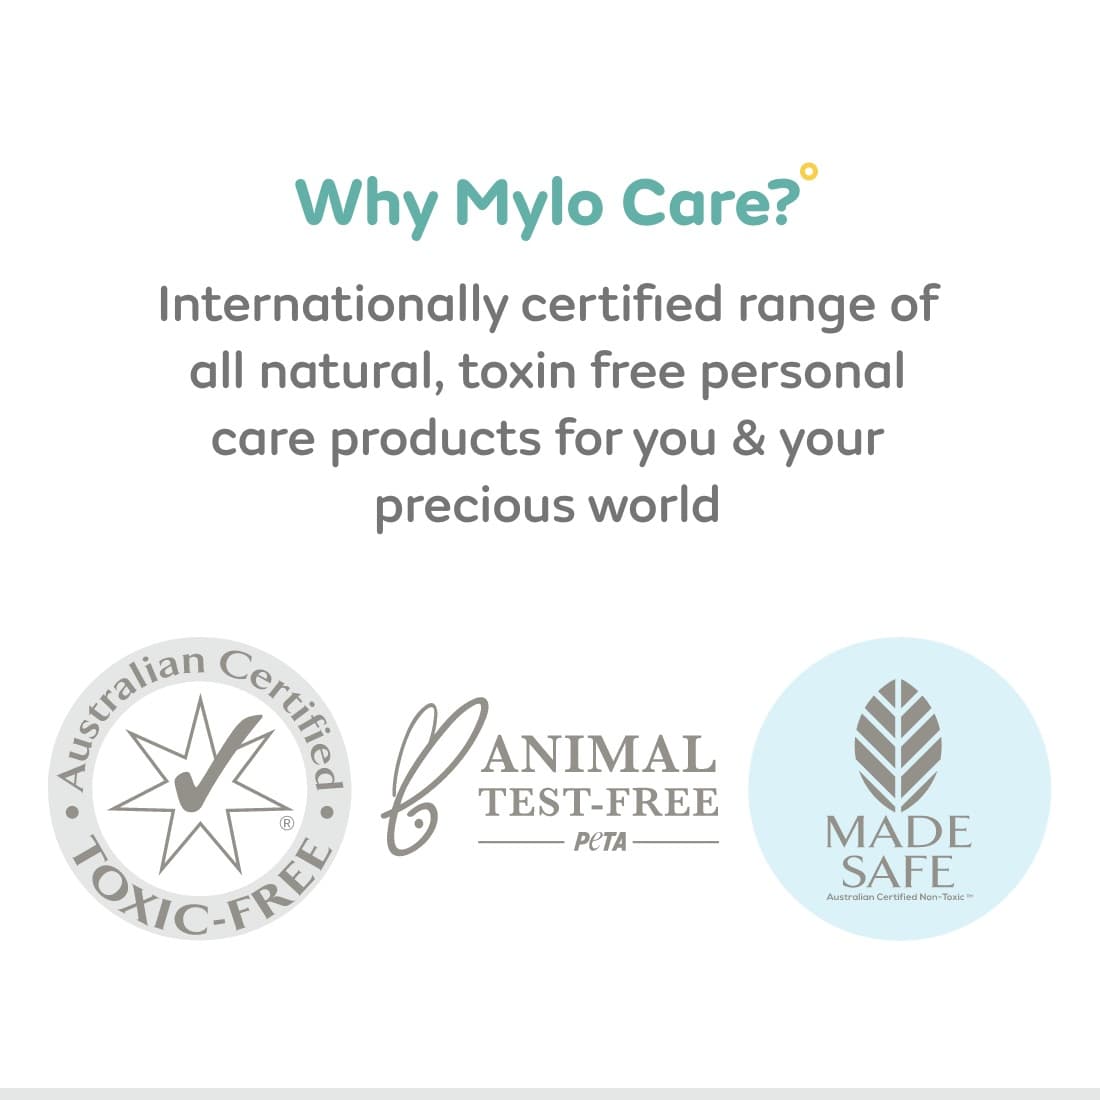 Mylo Free Size Washable & Reusable Cloth Diaper With 3 Dry Feel Absorbent Insert Pad (3M-3Y) Floral Spring Print-Pack of 3 + Coconut Oil & Neem Wipes - Pack of 1